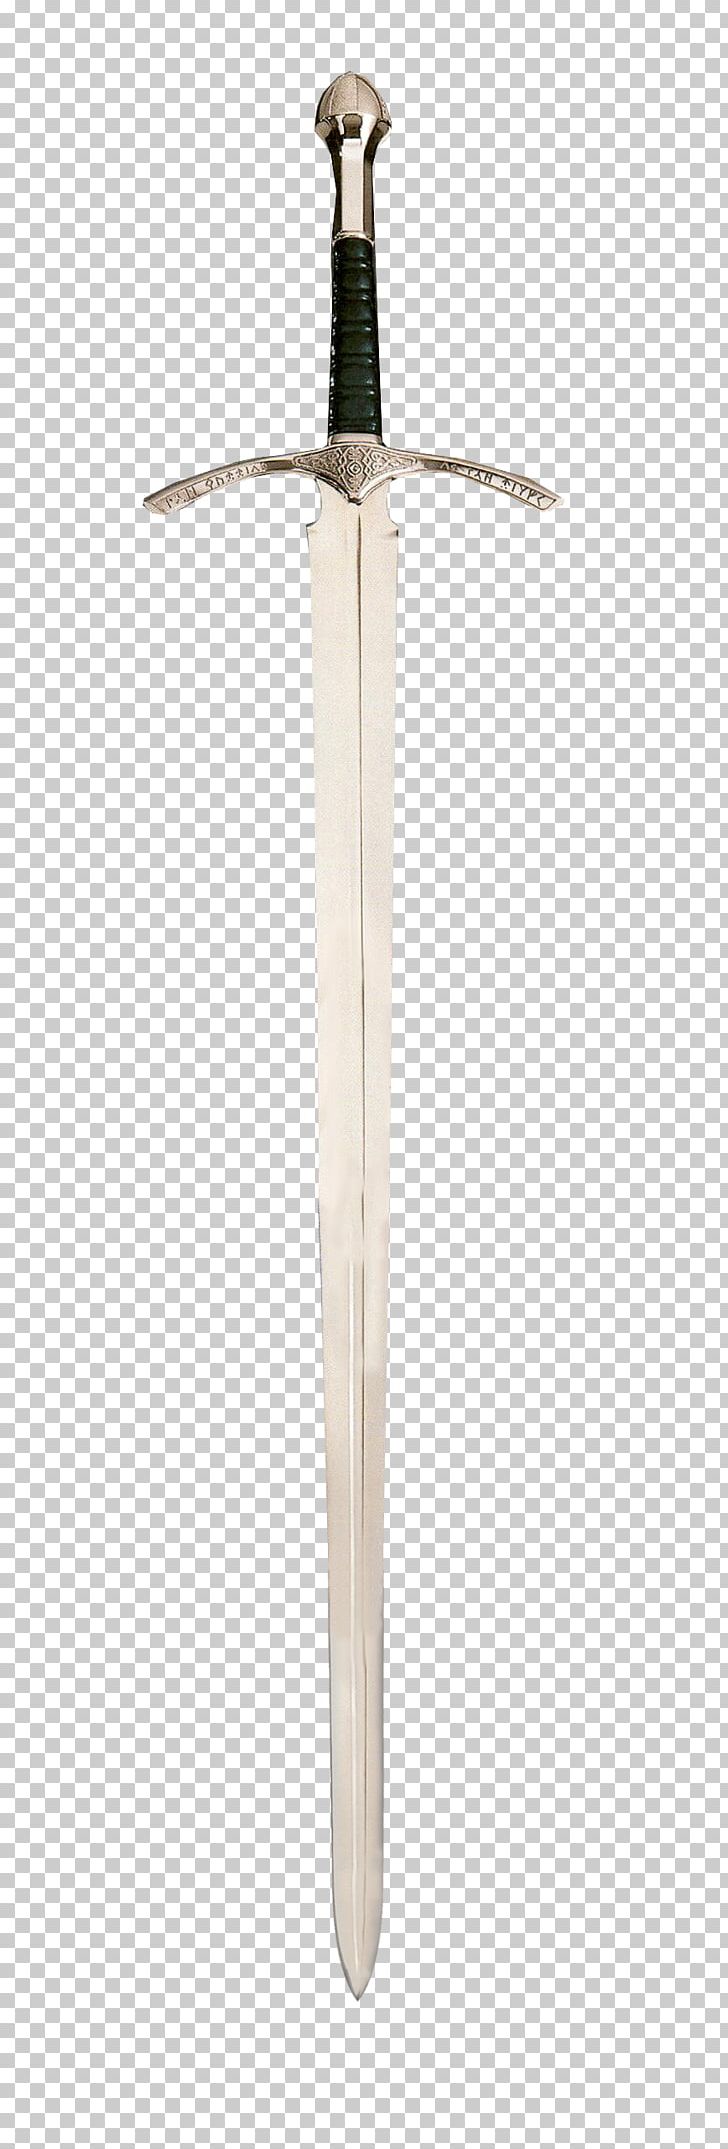 Sword Weapon Arma Bianca PNG, Clipart, Ancient, Ancient Egypt, Ancient Greece, Ancient Greek, Ancient Paper Free PNG Download